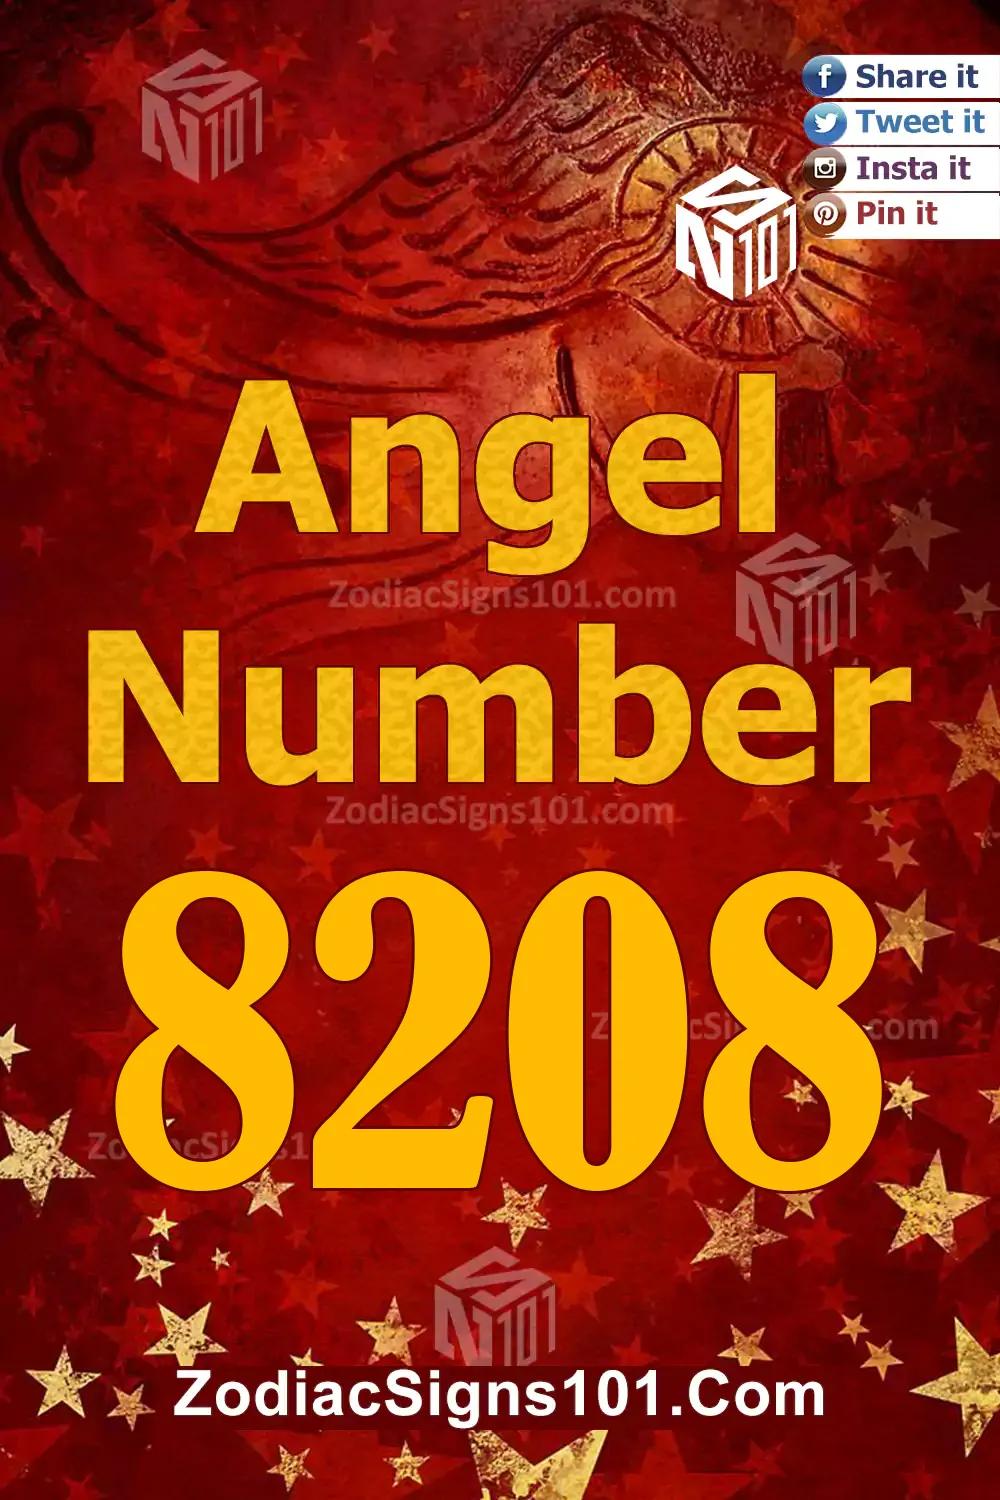 8208 Angel Number Meaning